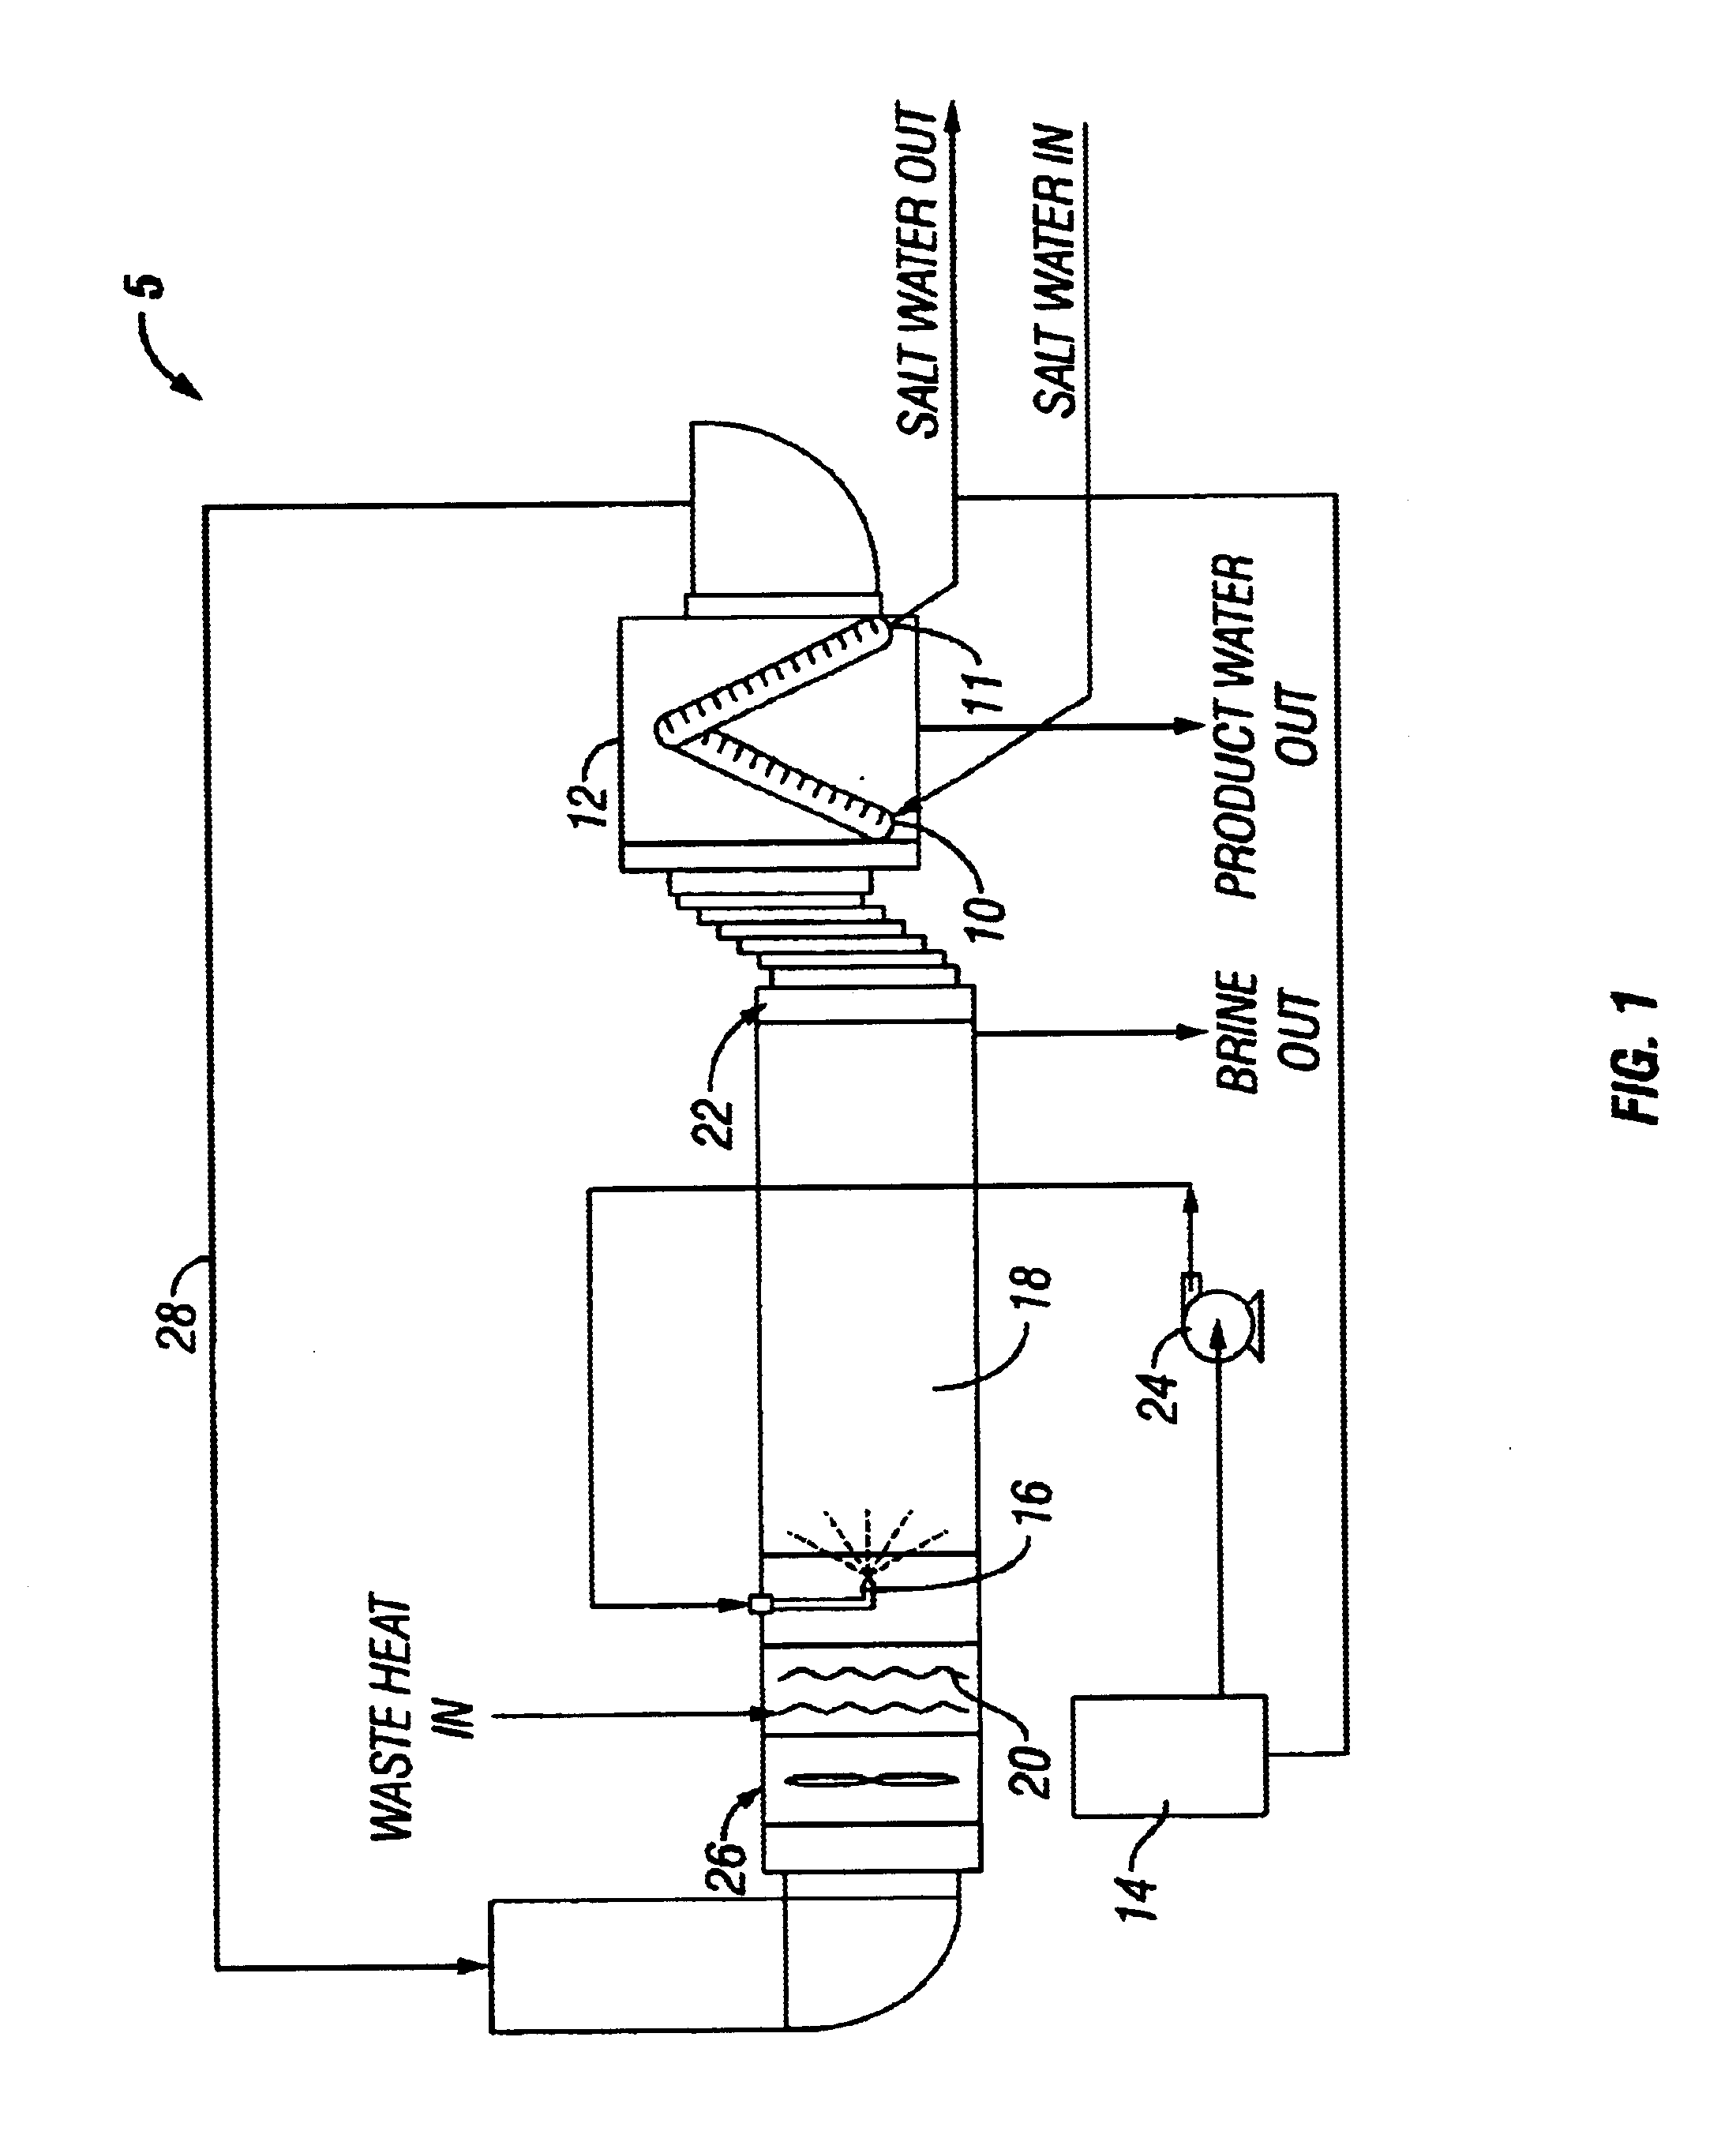 Apparatus and method for thermal desalination based on pressurized formation and evaporation of droplets